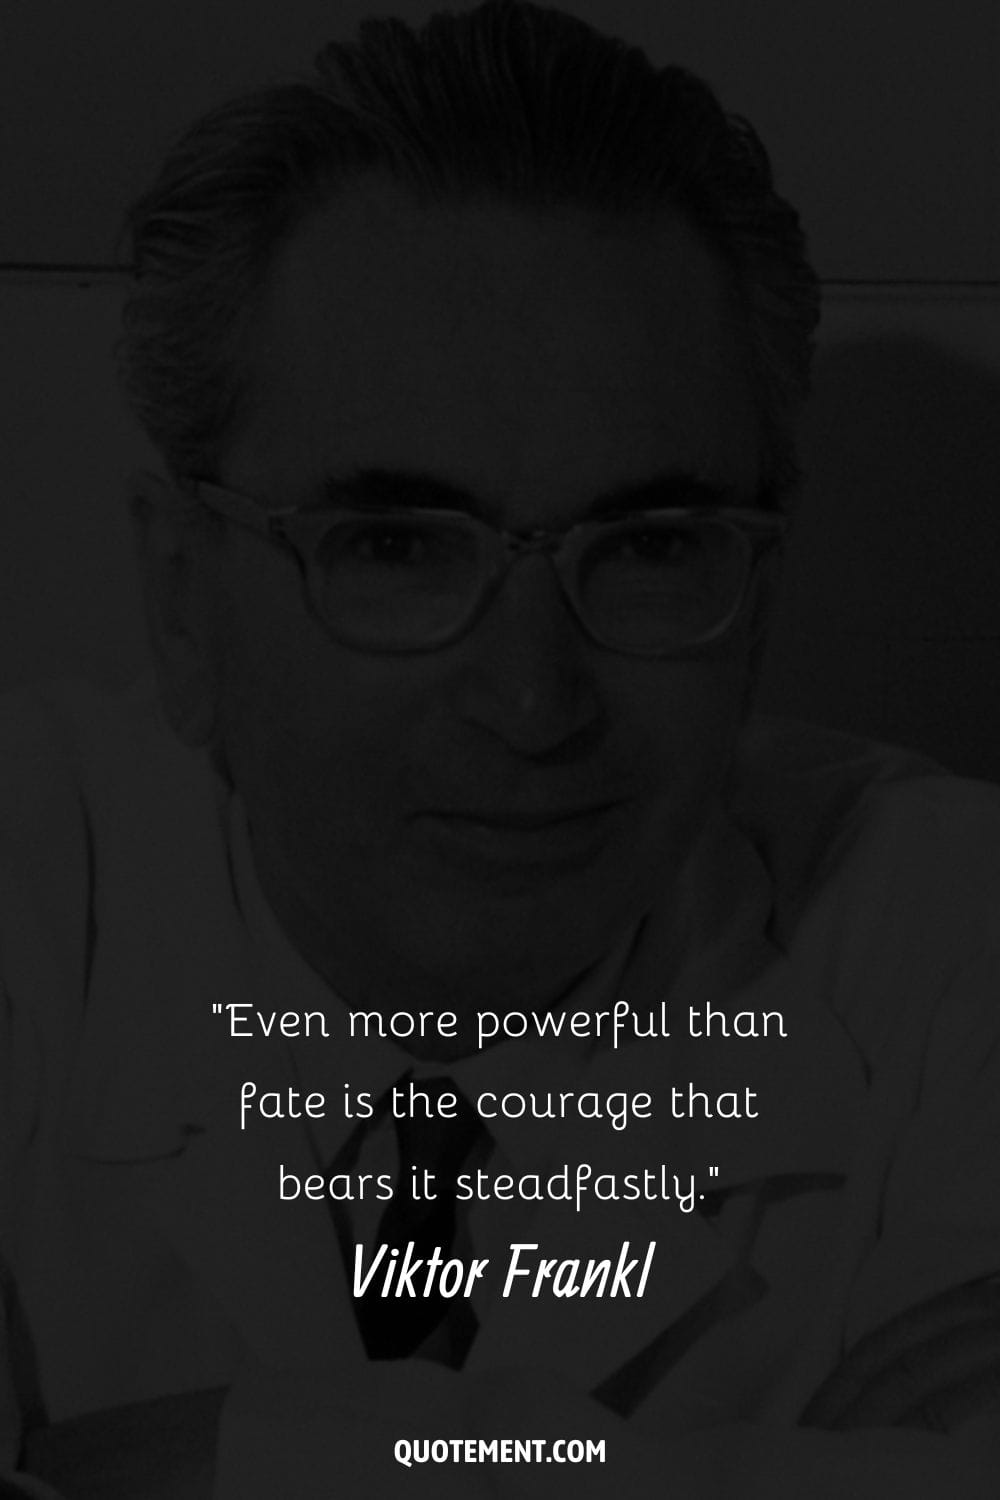 Photograph of Viktor Frankl representing quote about courage.